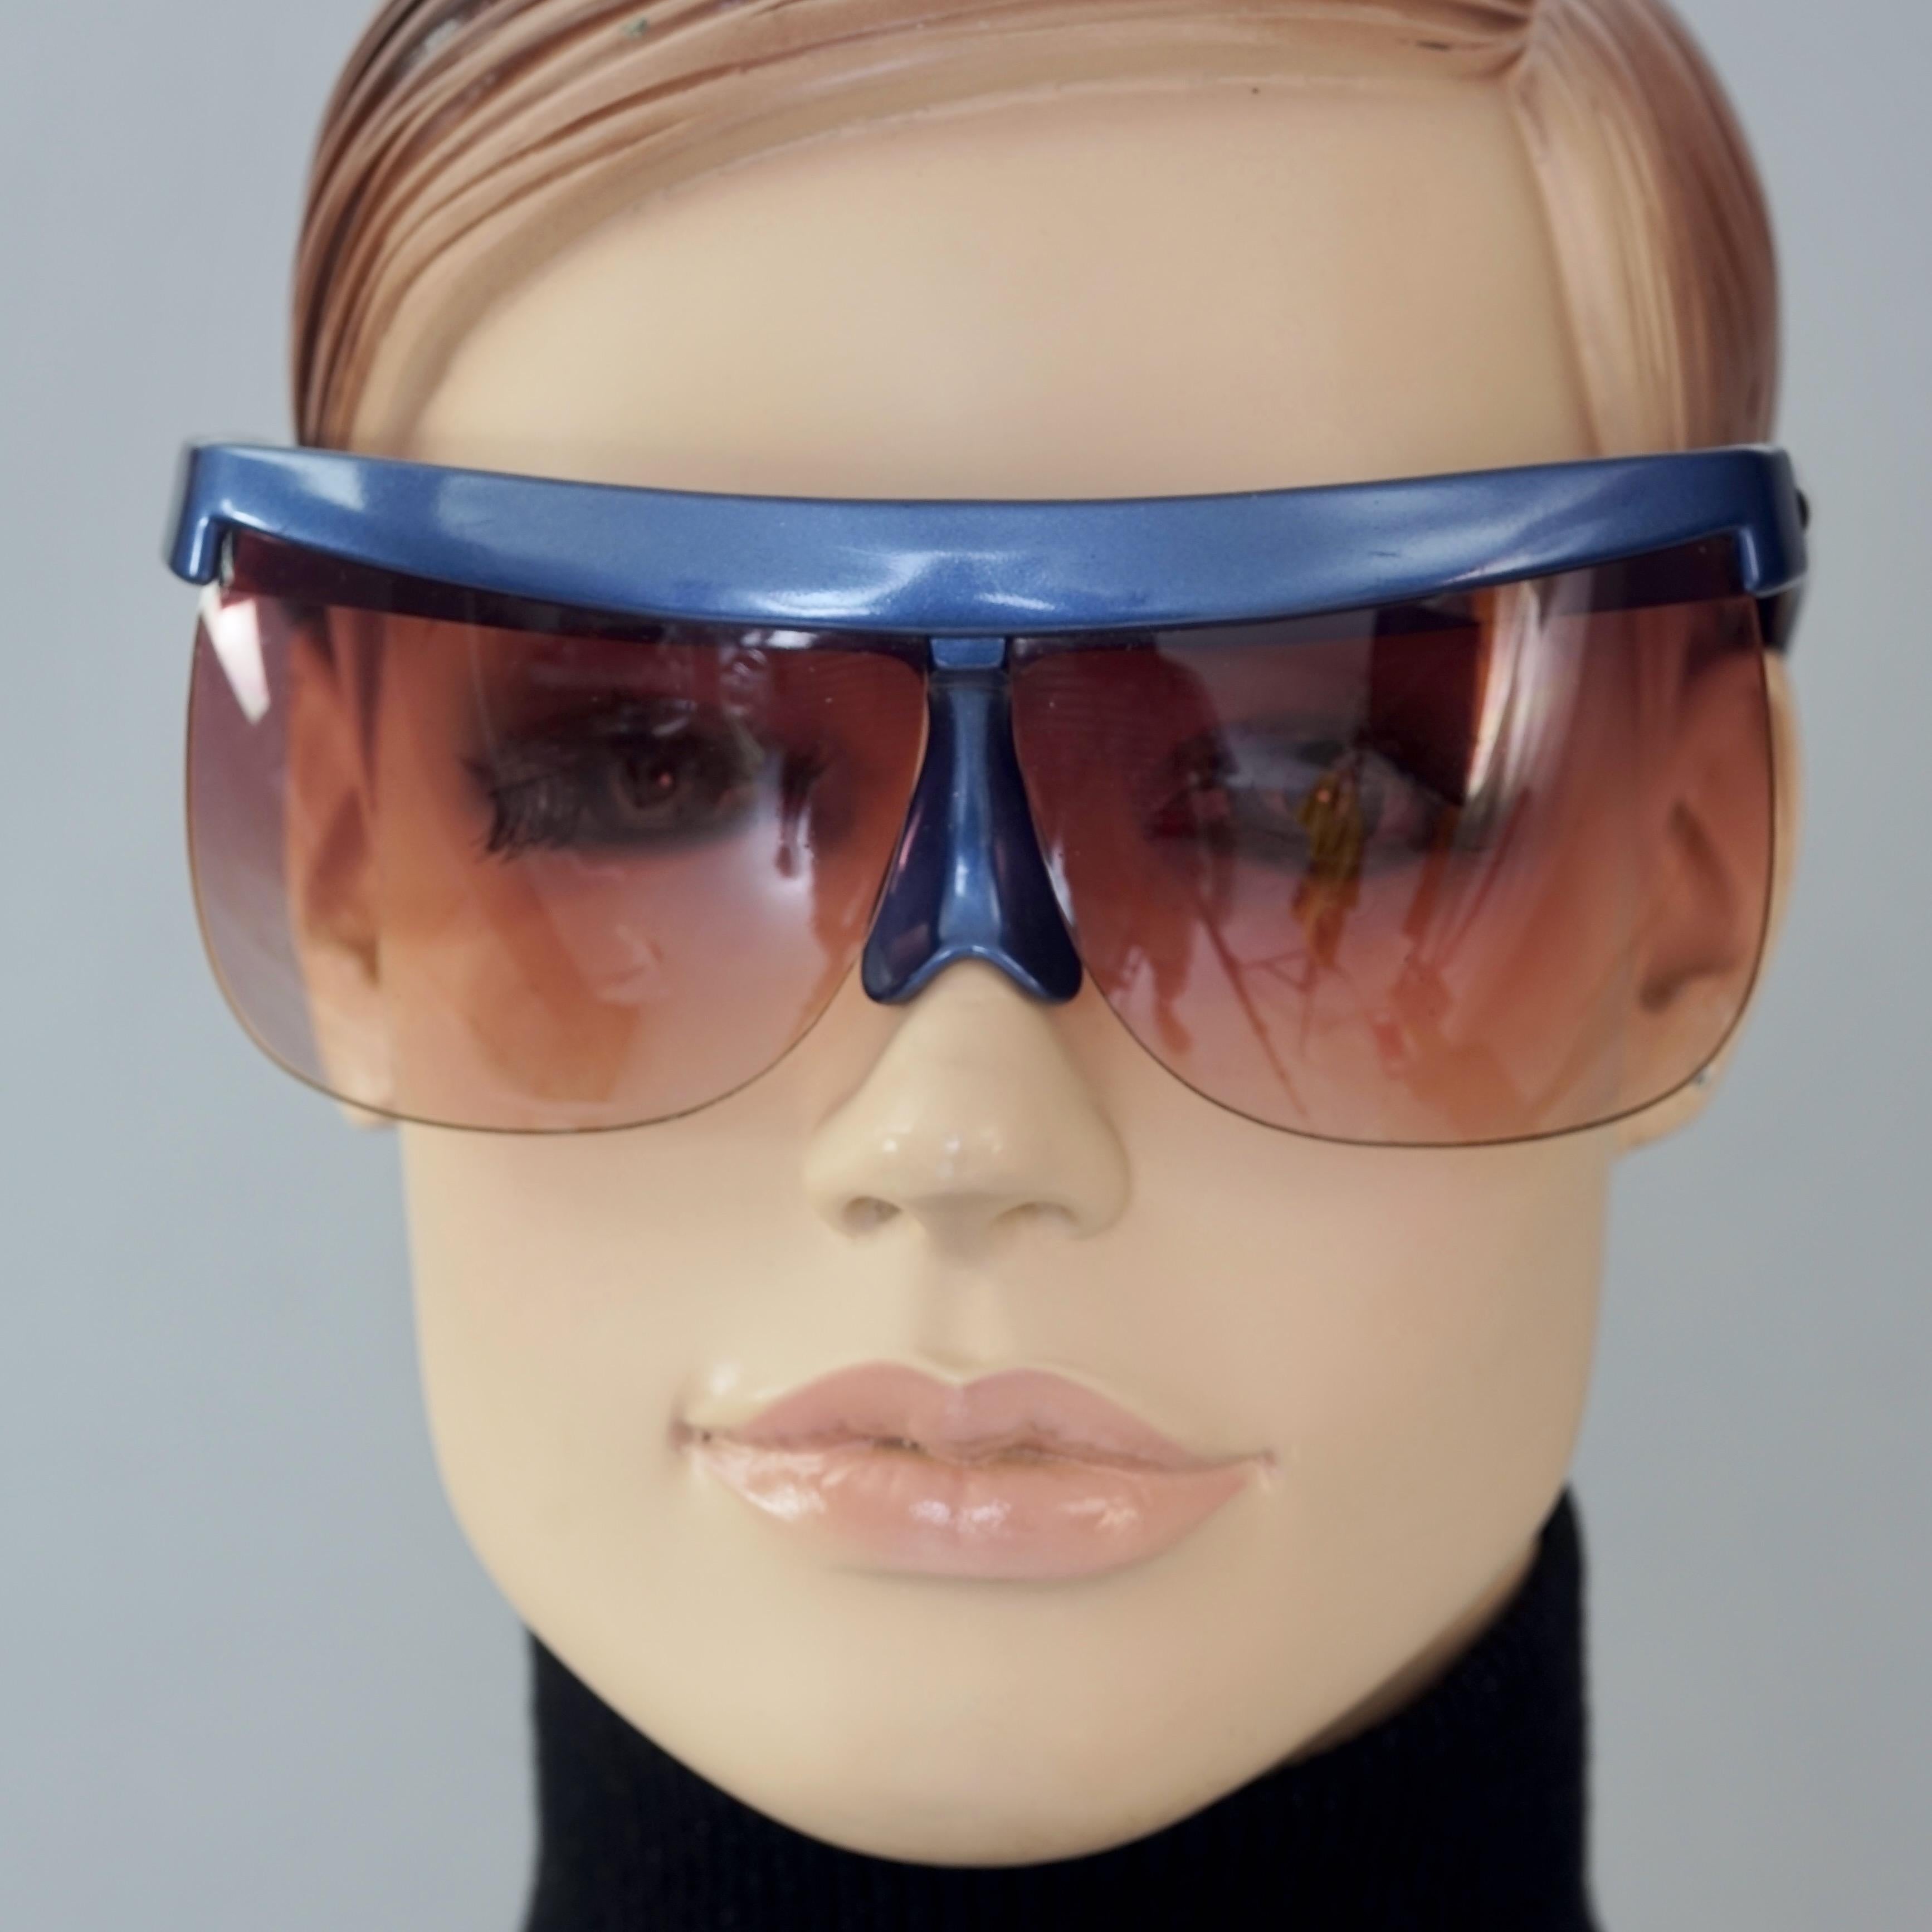 Vintage COURREGES Sculptural Futuristic Oversized Blue Sunglasses

Measurements:
Height: 2.36 inches (6 cm)
Horizontal Width: 6.50 inches (16.5 cm)
Temples: 4.72 inches (12 cm)

Features:
- 100% Authentic ANDRE COURREGES. 
- Oversized futuristic